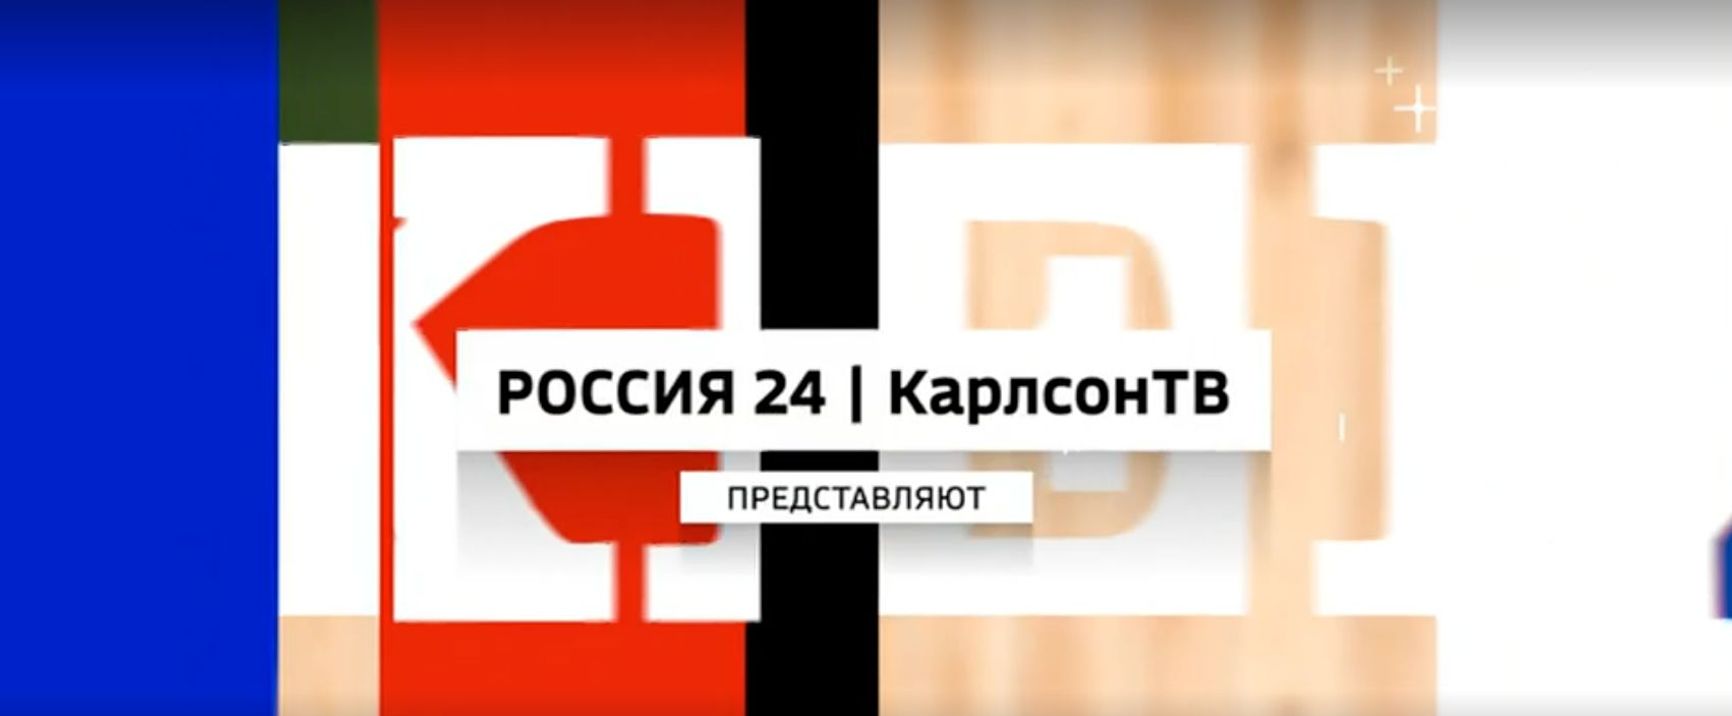 'Russia 24 and CarlsonTV present'